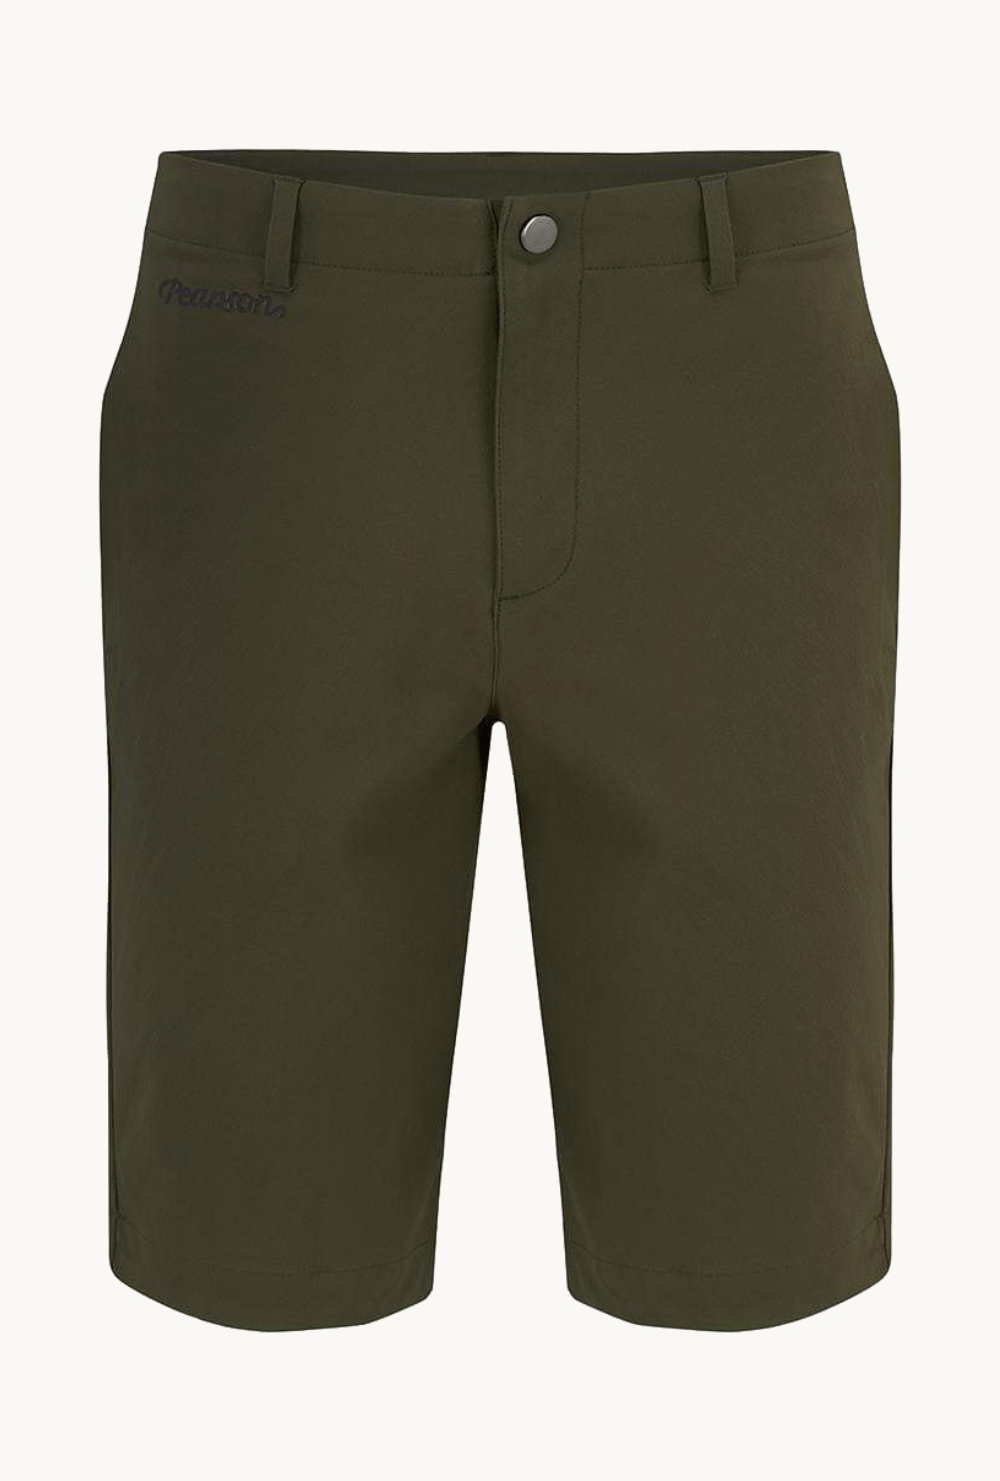 Pearson 1860  Kick Back - Urban Commuter Shorts Olive  Small 30 / Olive